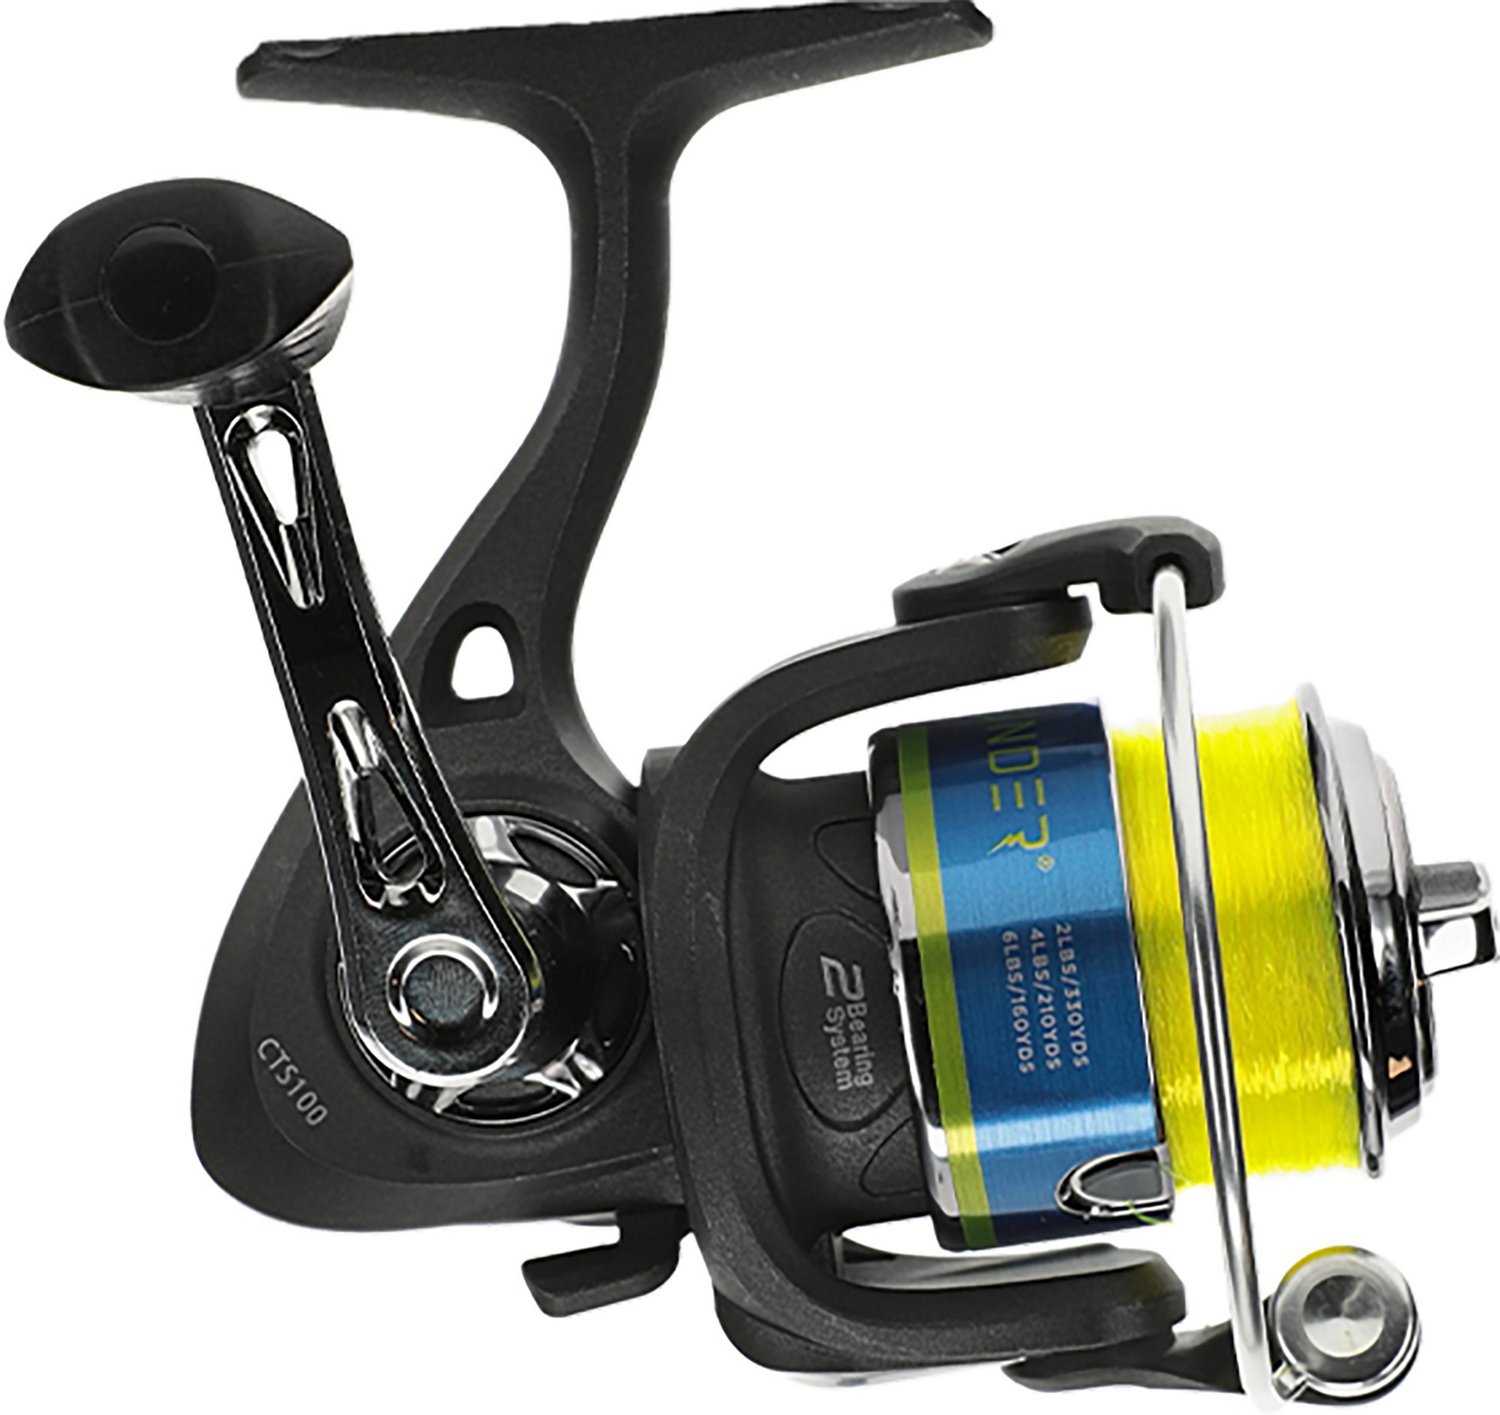 Academy Sports + Outdoors Crappie Thunder Spinning Reel